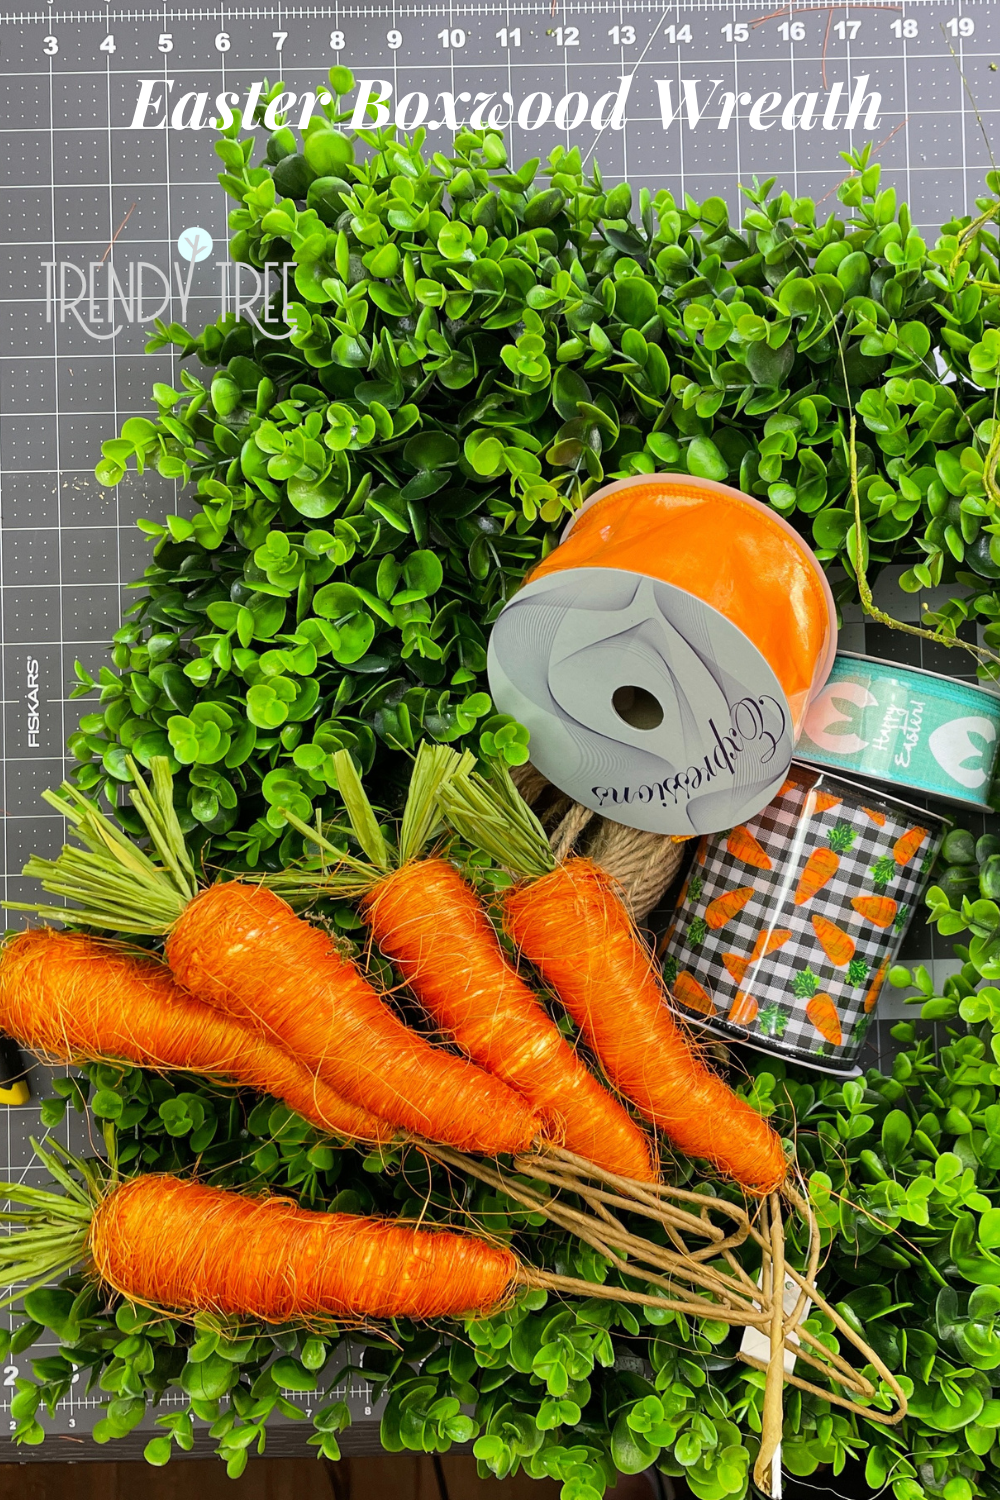 Supplies for Decorating a Boxwood Wreath for Easter